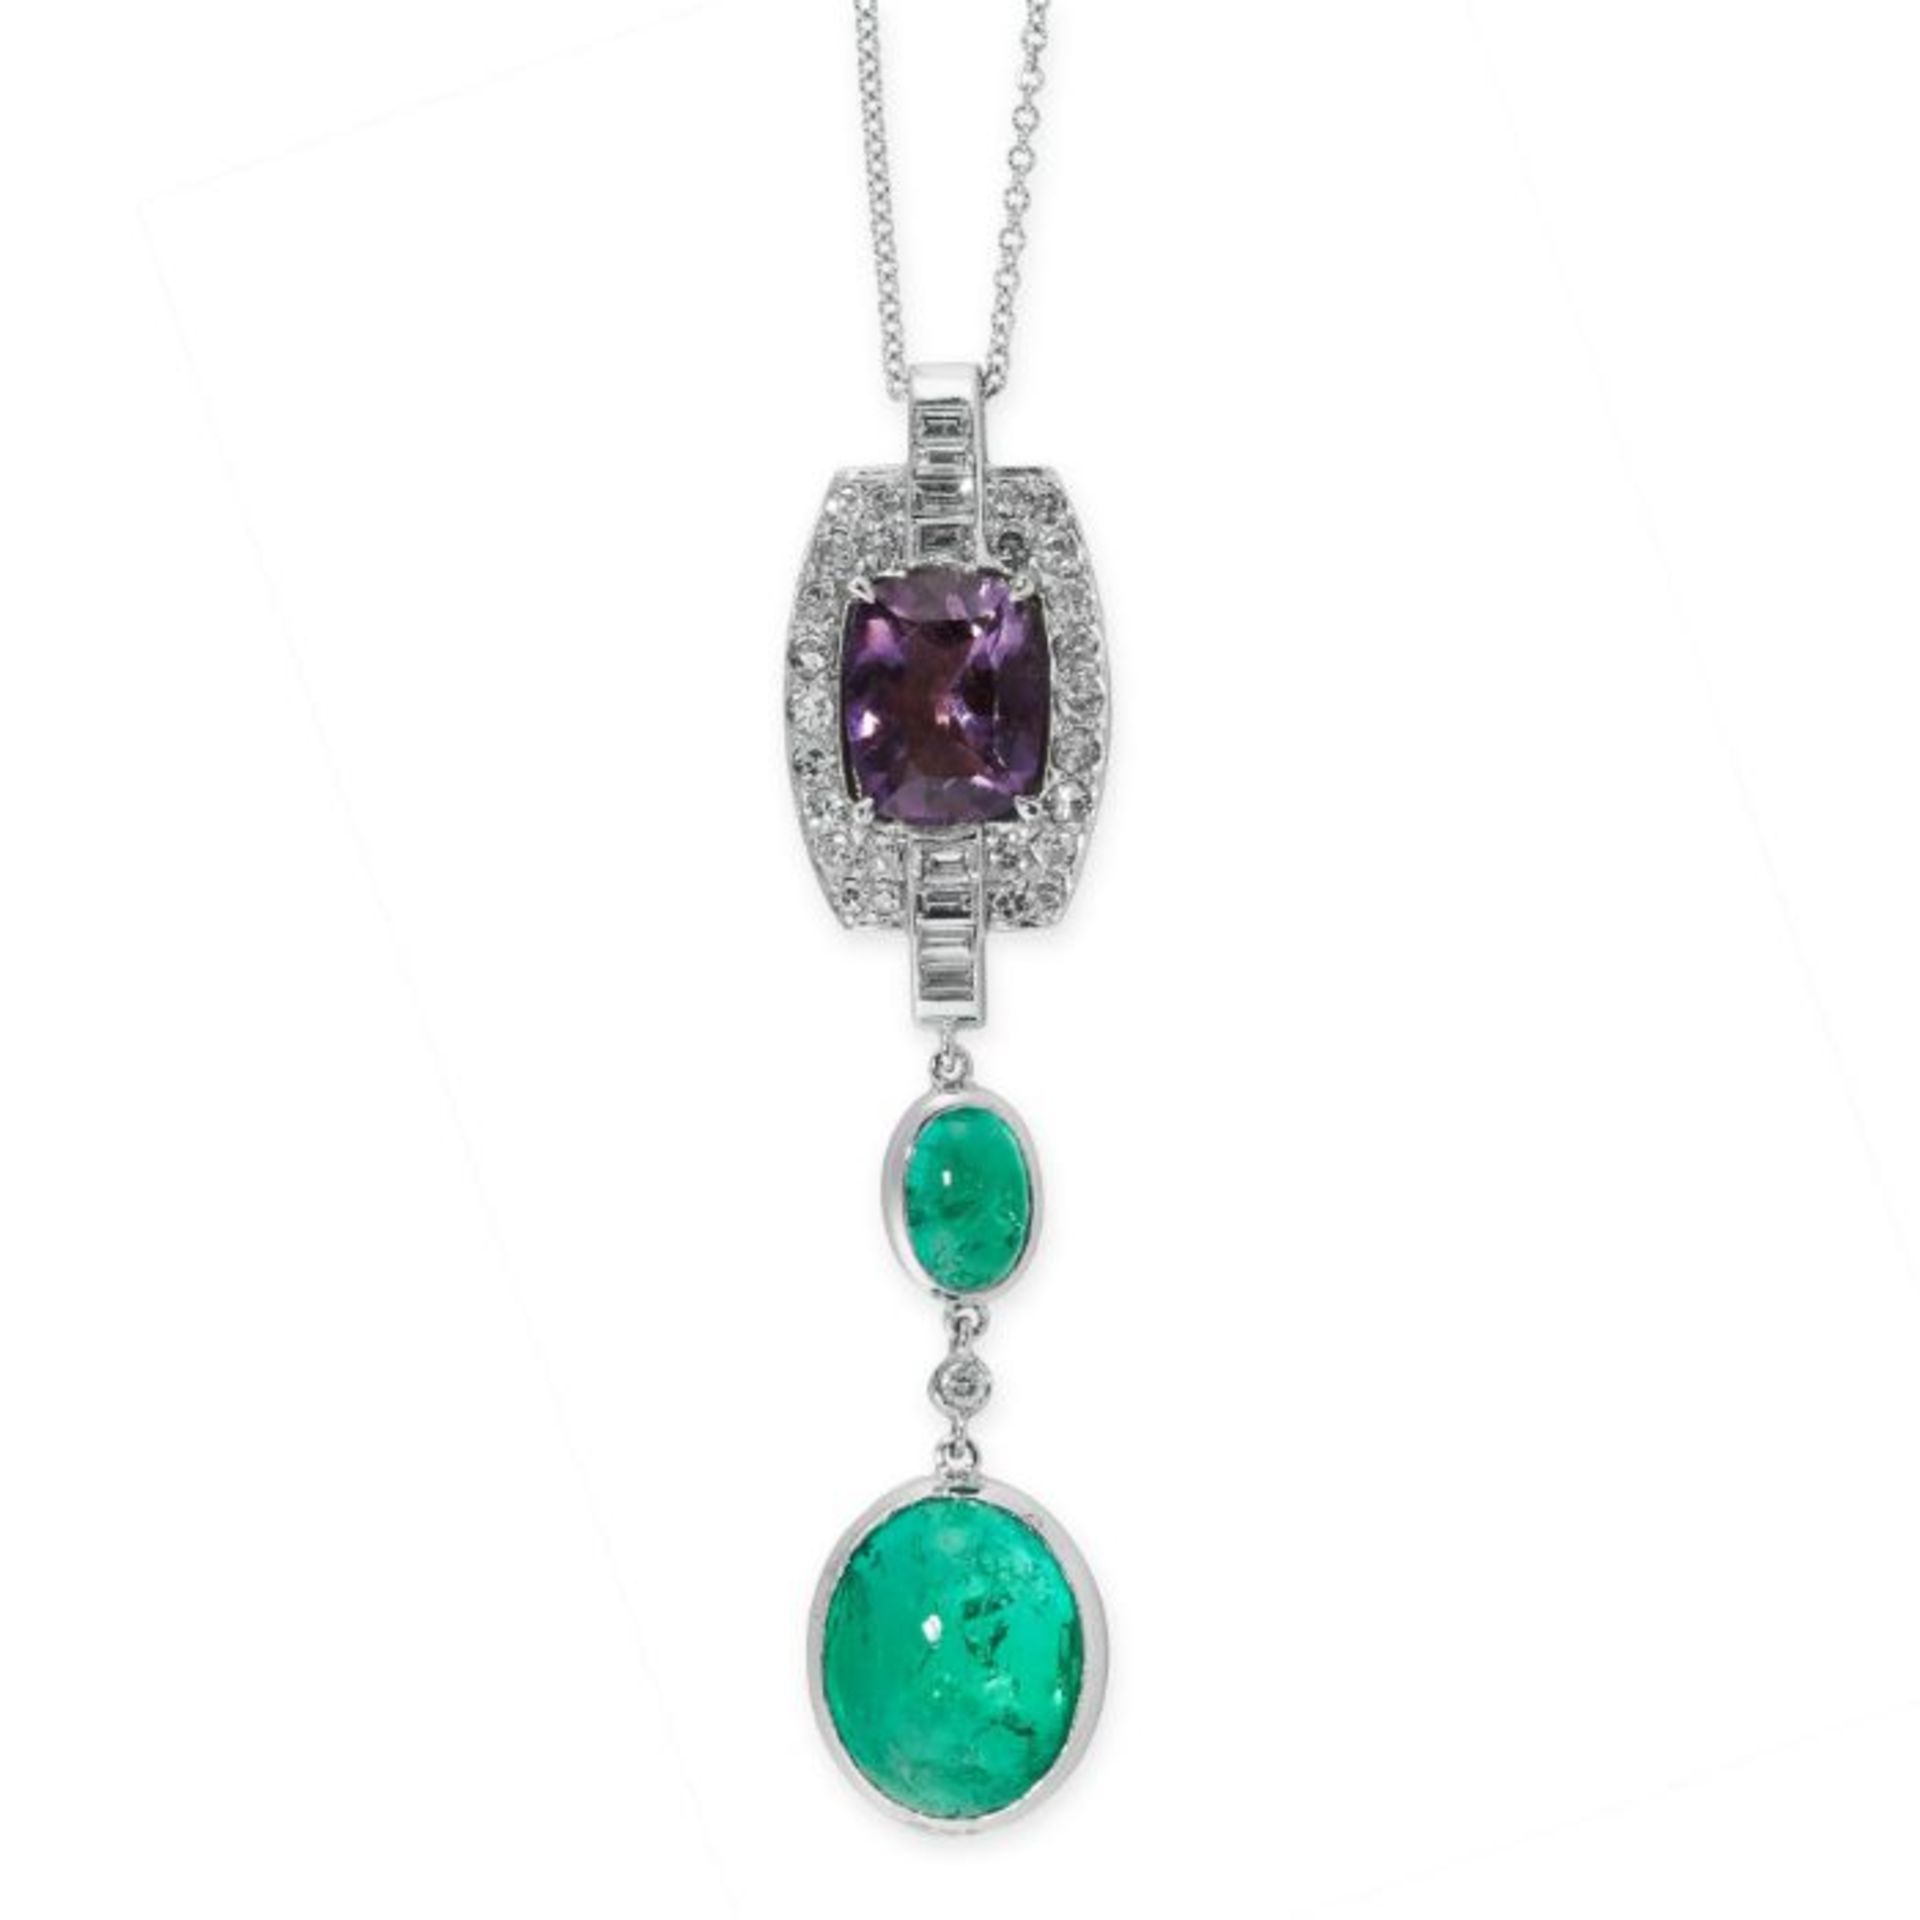 NO RESERVE - A COLOMBIAN EMERALD, AMETHYST AND DIAMOND PENDANT NECKLACE in 18ct white gold and pl...